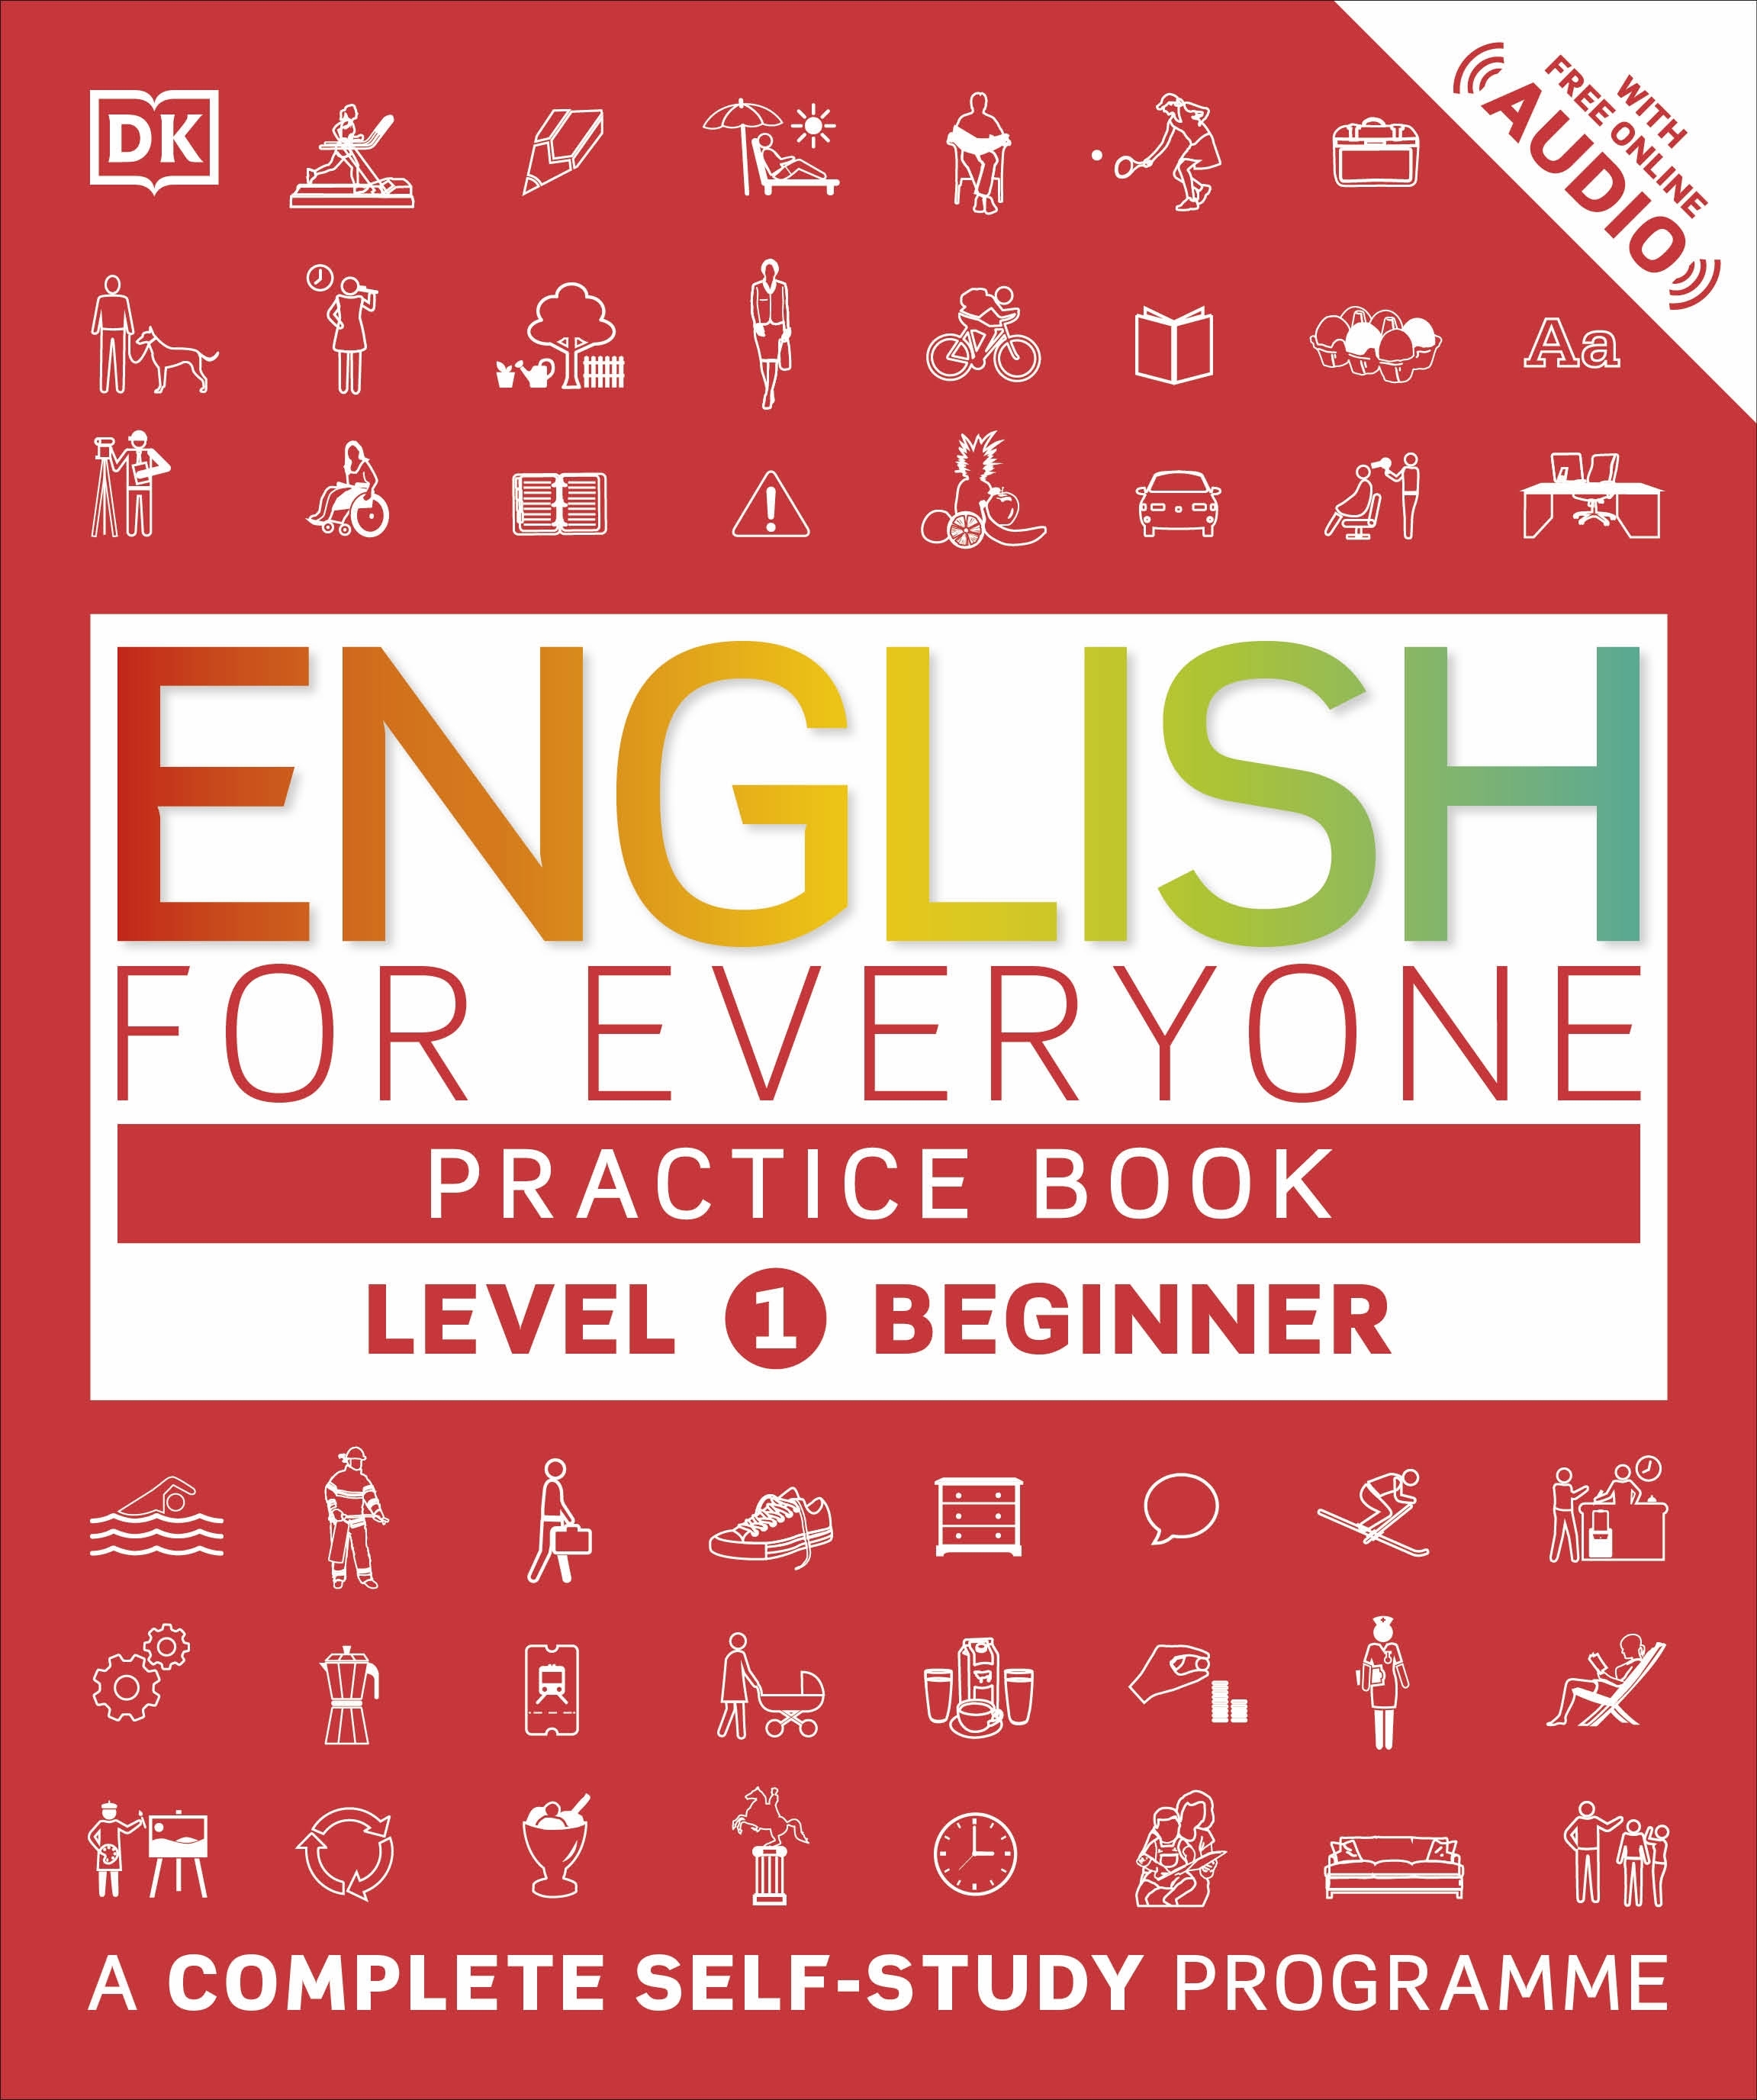 english-for-everyone-practice-book-level-1-beginner-by-dk-penguin-books-new-zealand